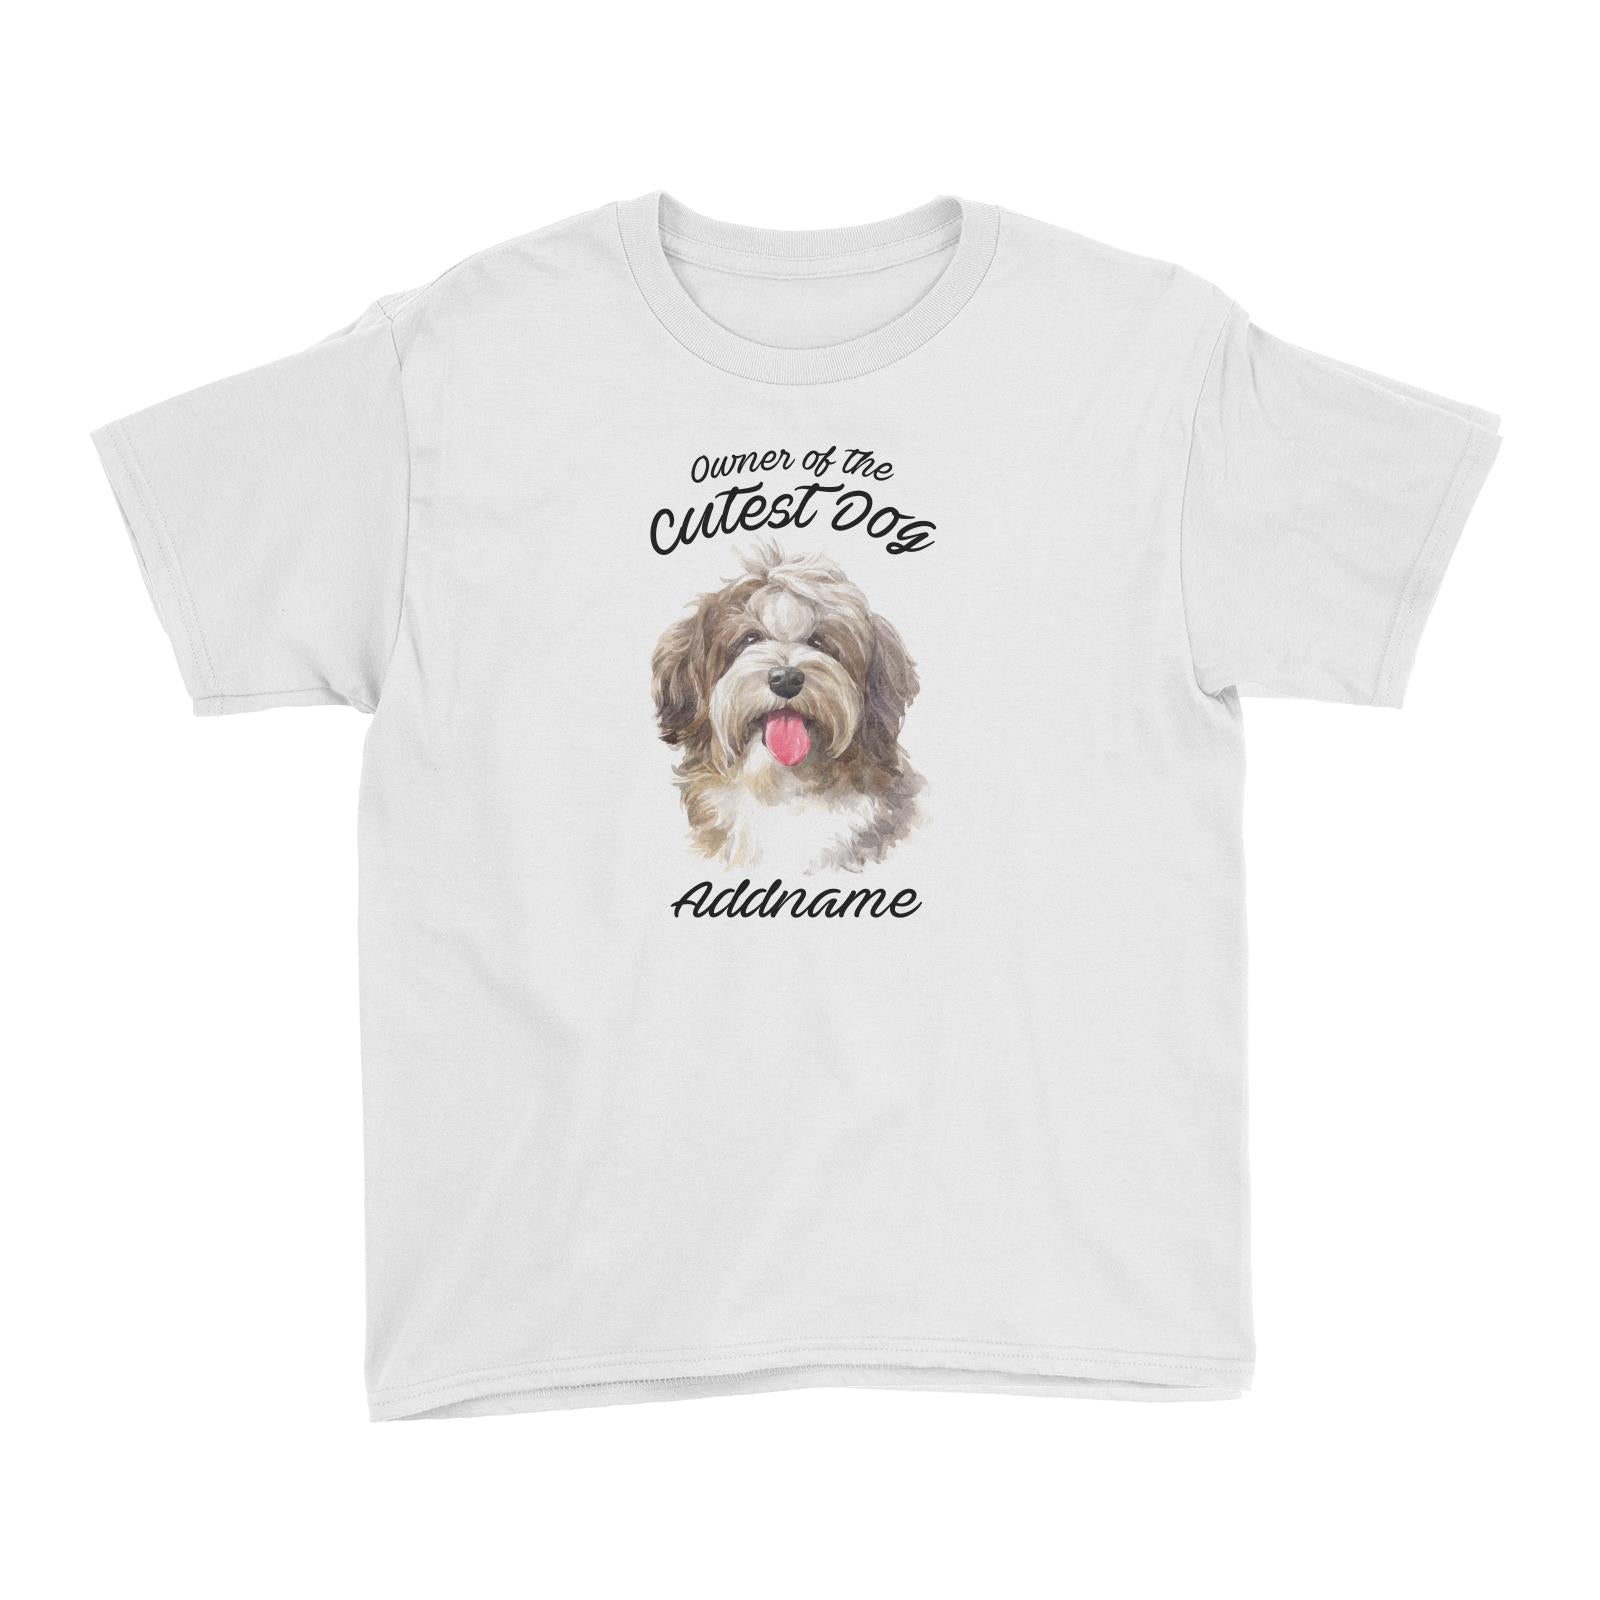 Watercolor Dog Owner Of The Cutest Dog Shaggy Havanese Addname Kid's T-Shirt